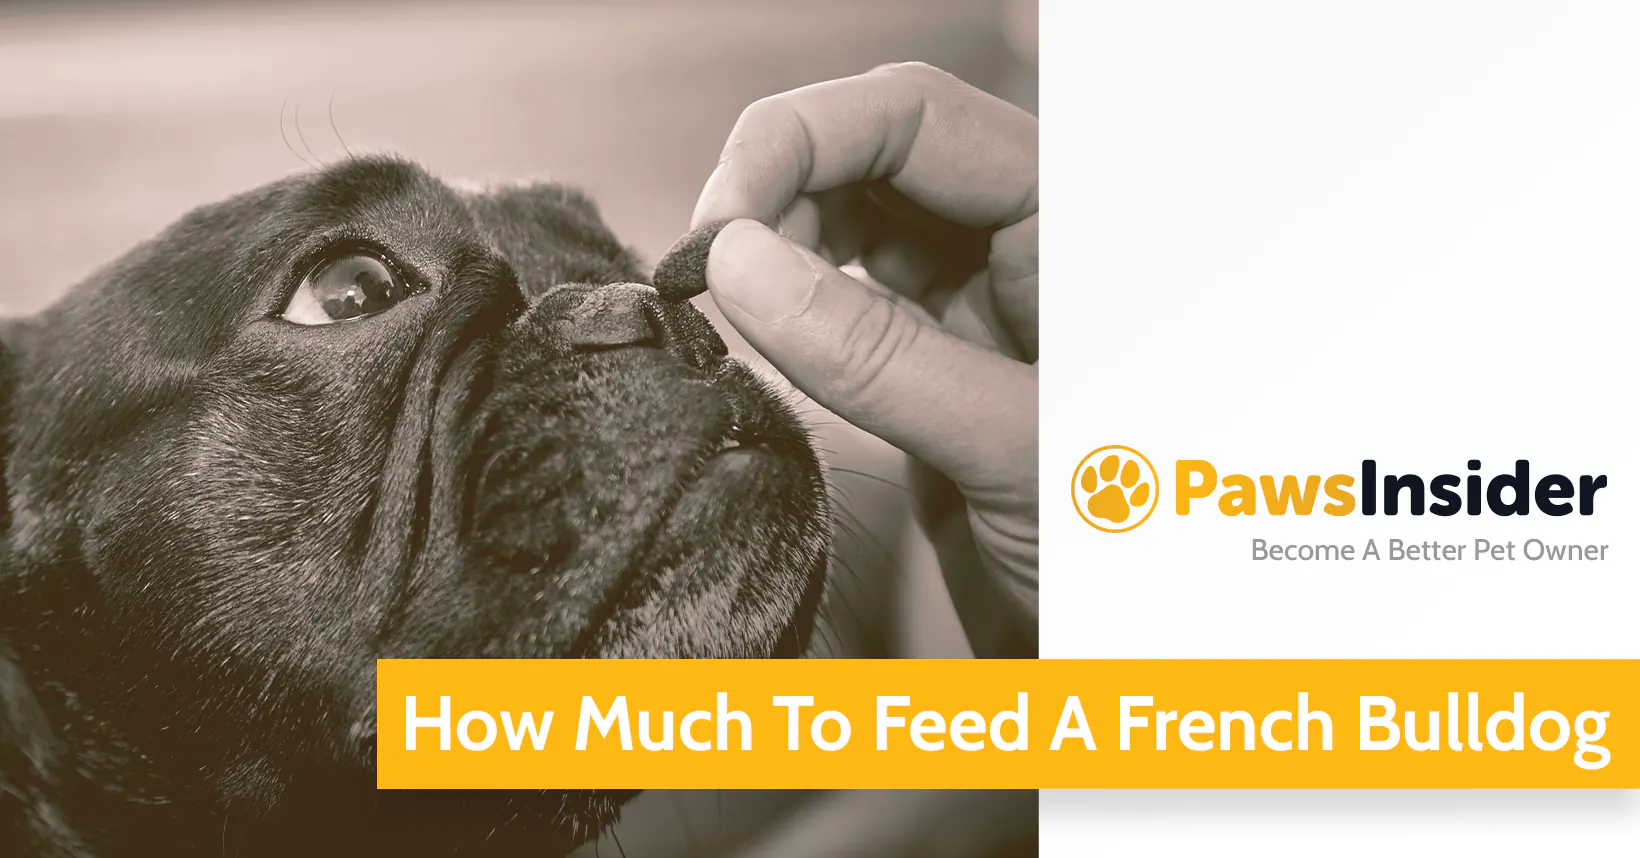 How Much To Feed A French Bulldog - Paws Insider